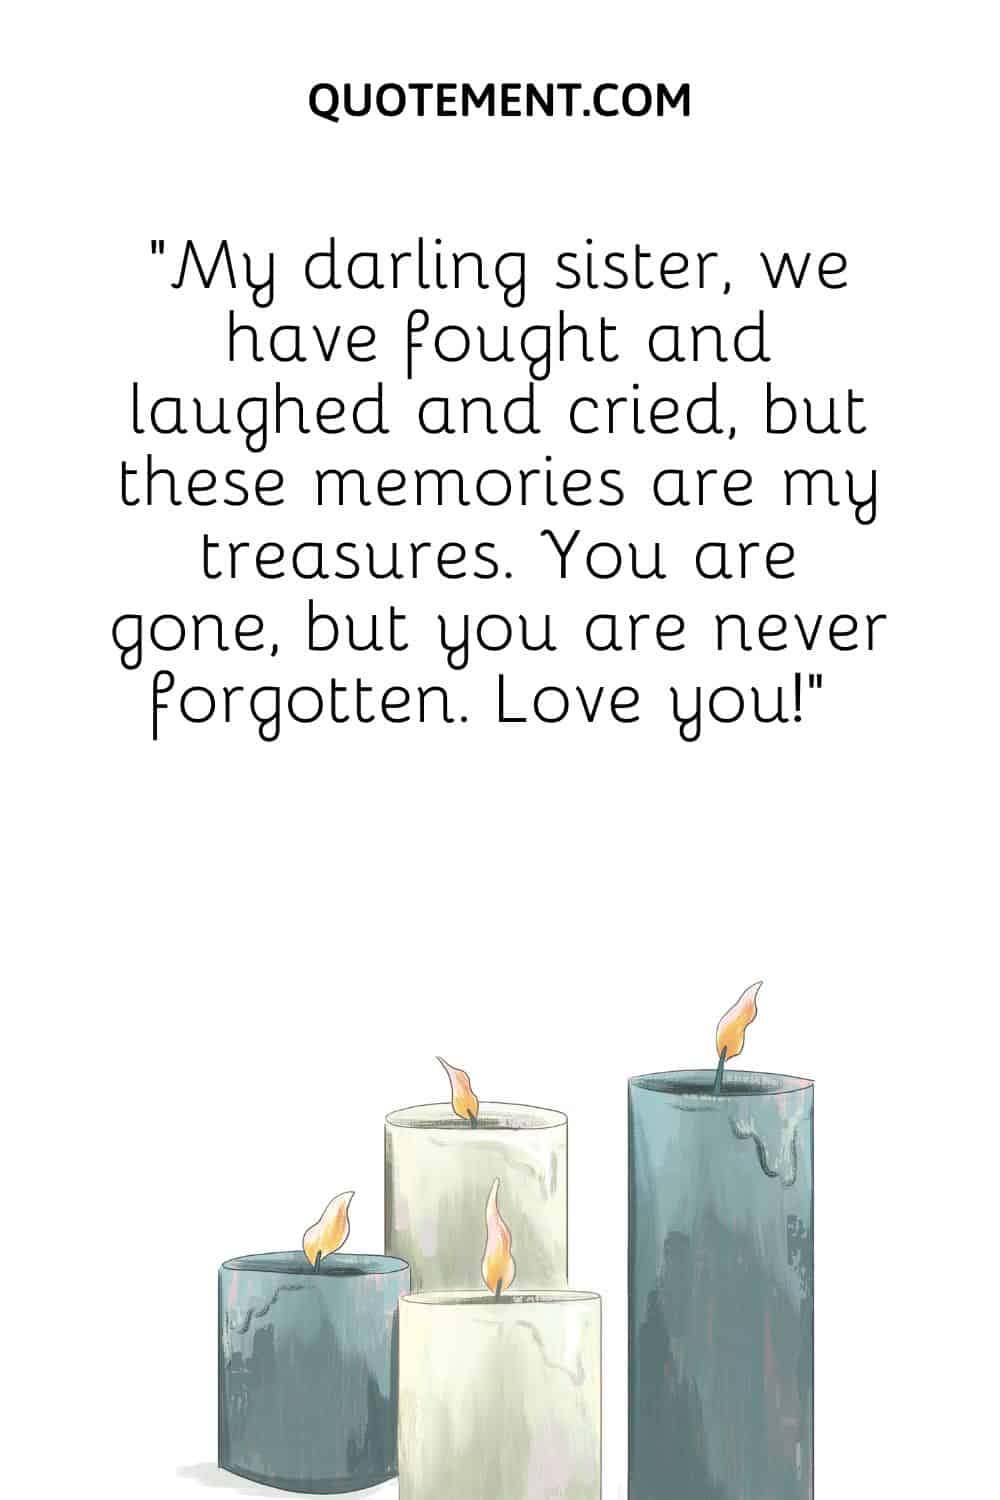 “My darling sister, we have fought and laughed and cried, but these memories are my treasures. You are gone, but you are never forgotten. Love you!” 